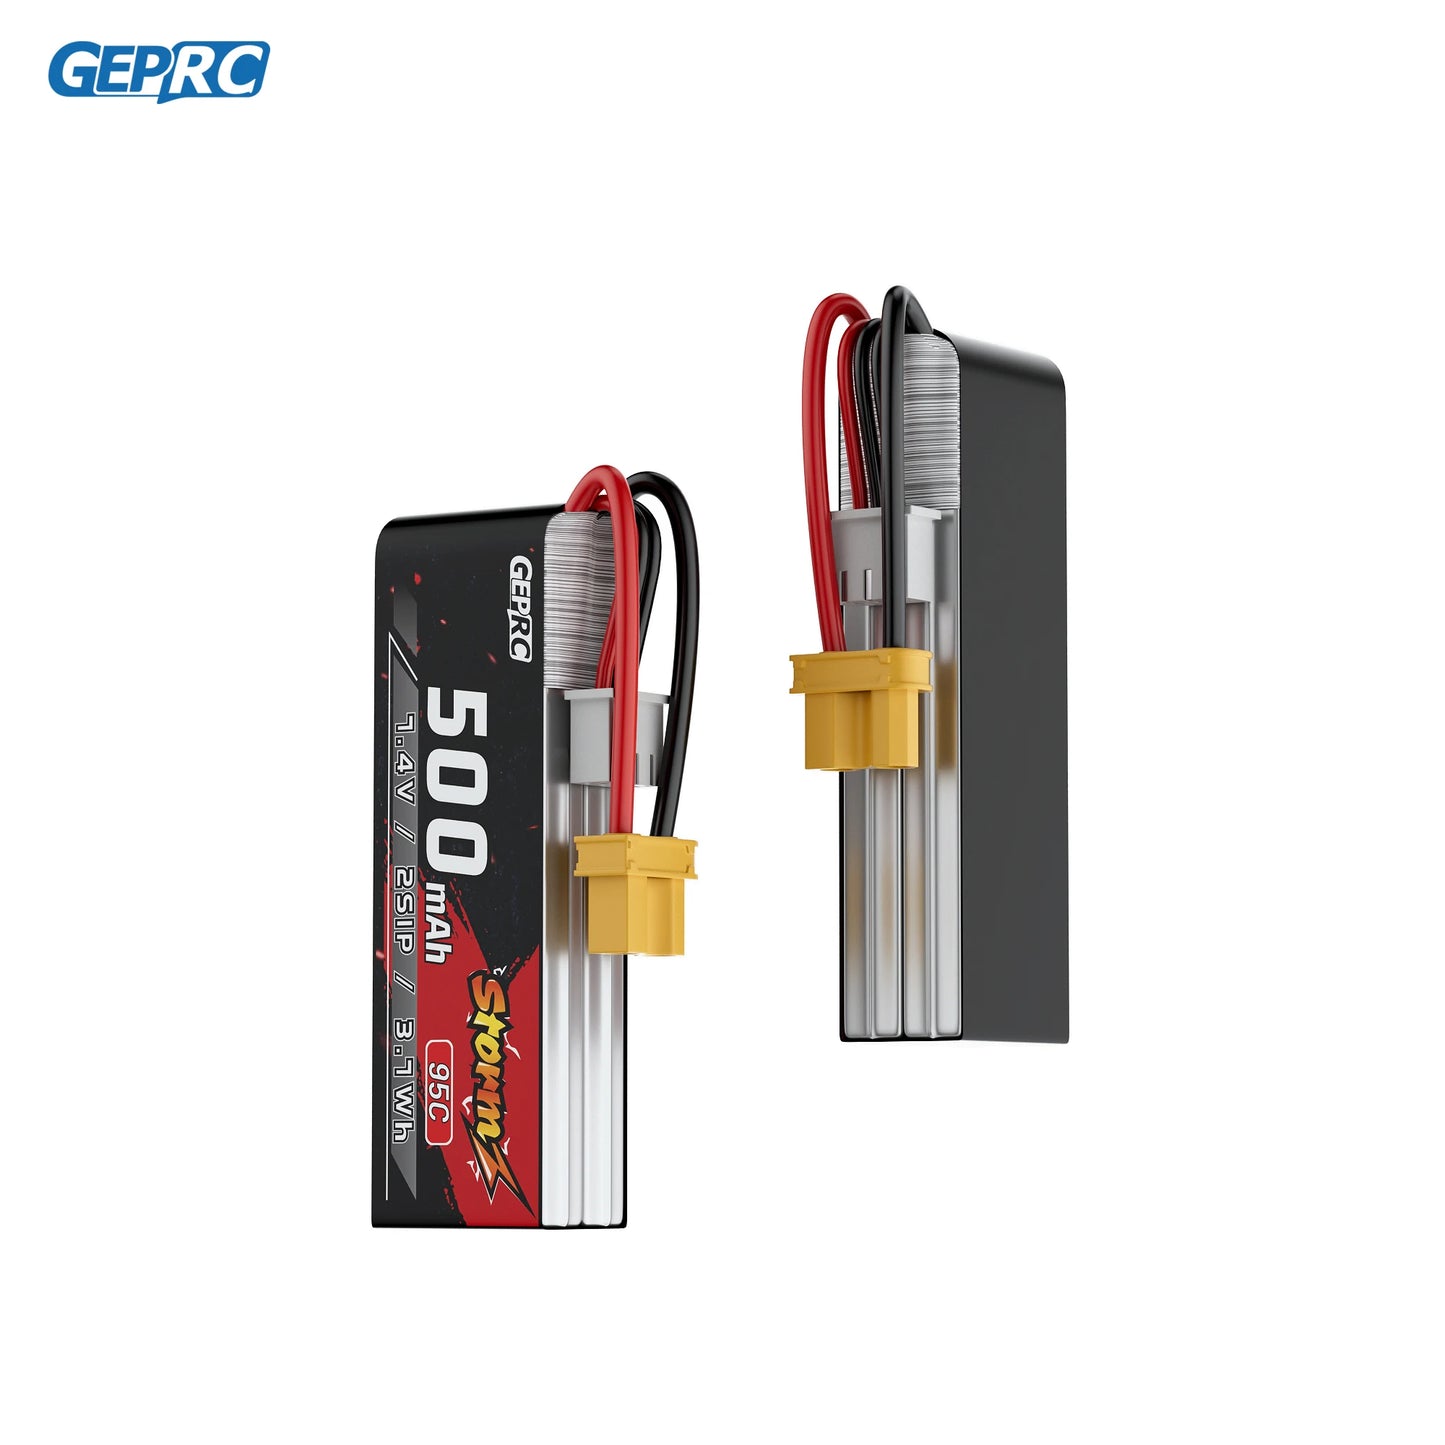 GEPRC Storm LiPo 2S 500mAh 95C Battery - TX30 Suitable Series Drone for RC FPV Quadcopter Freestyle Drone Accessories Parts